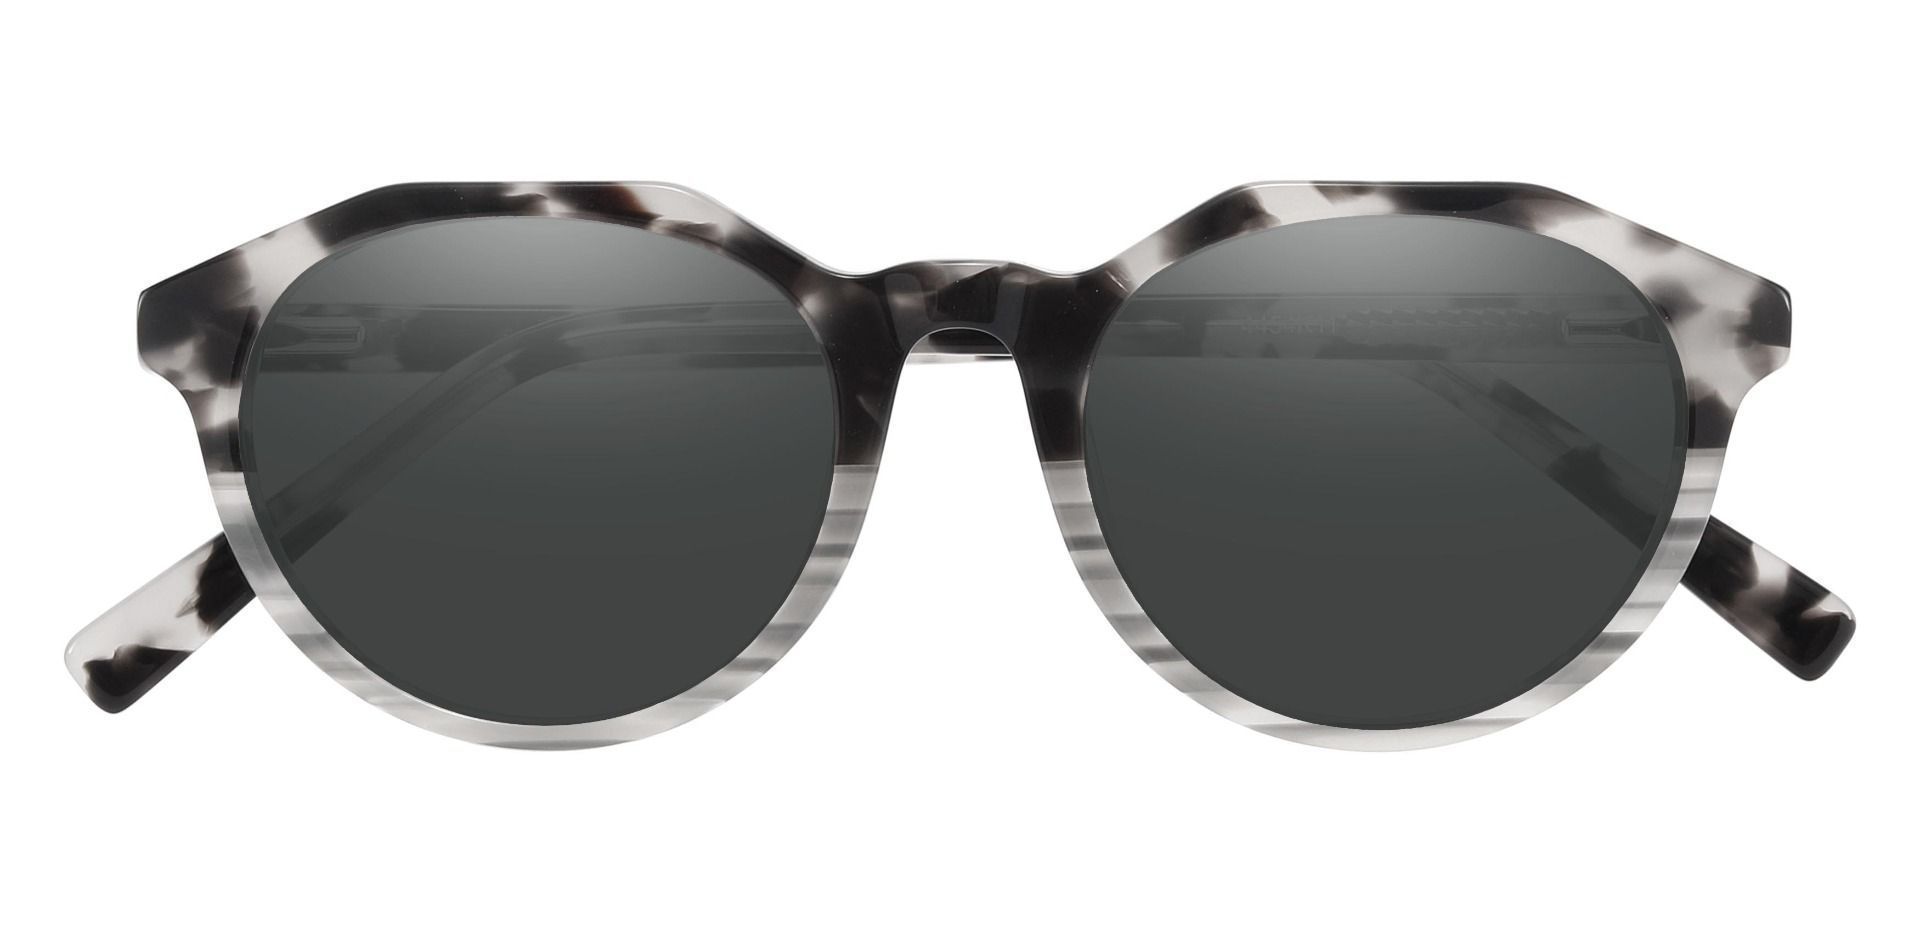 Mayfield Oval Non-Rx Sunglasses - Black Frame With Gray Lenses